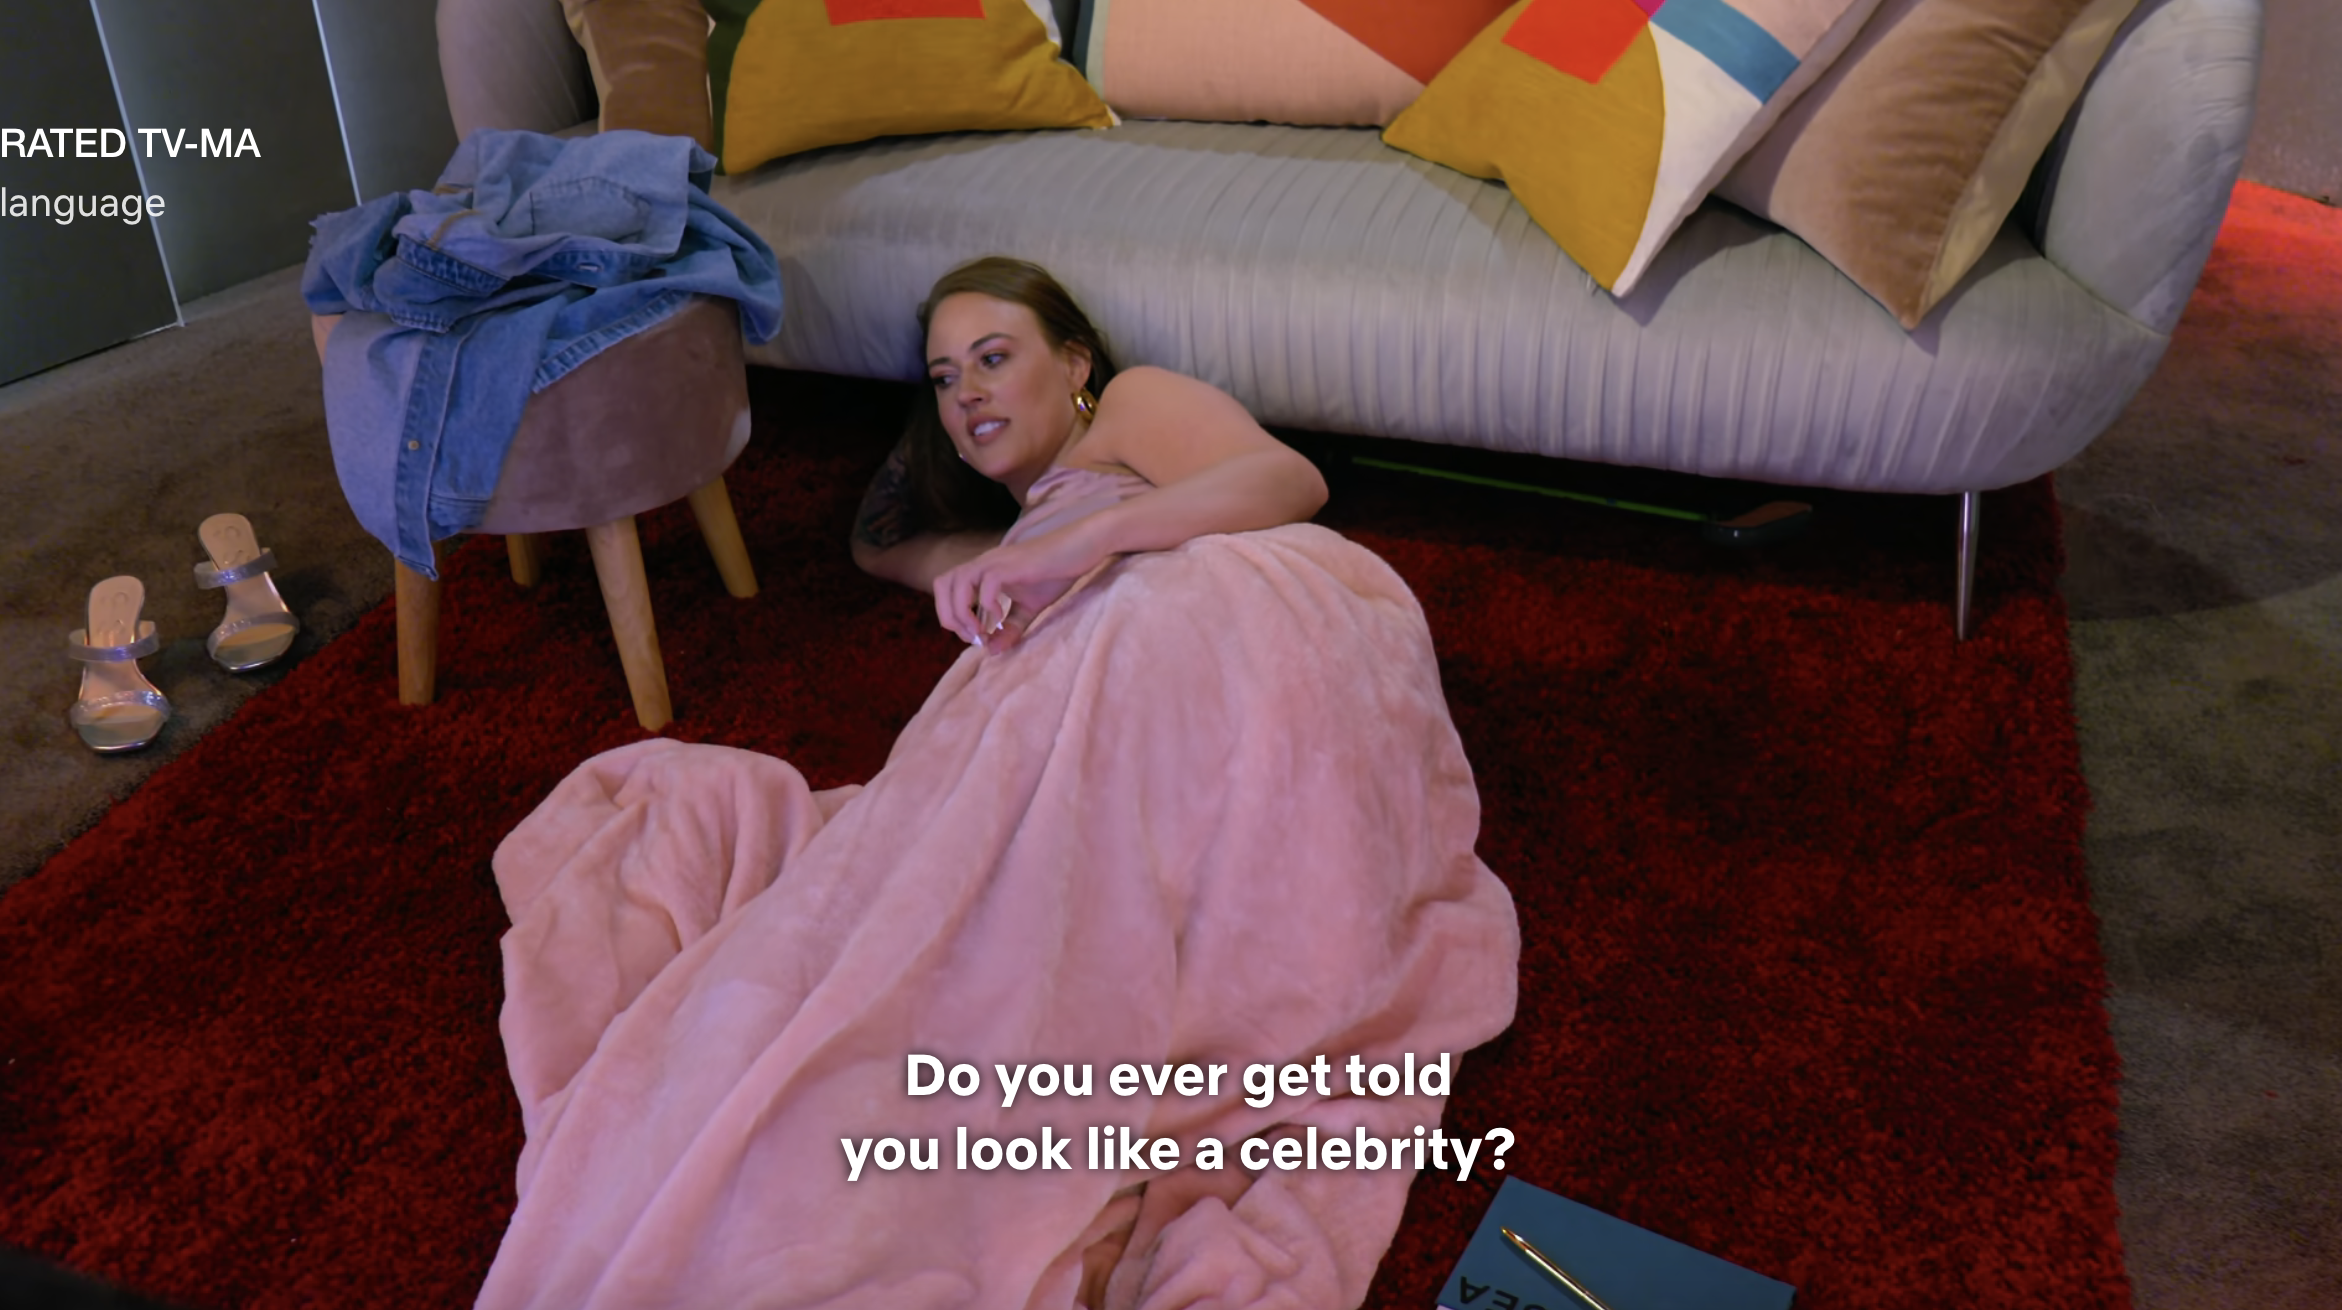 A person lounges on a couch, wearing a flowing pink outfit, with subtitle text &quot;Do you ever get told you look like a celebrity?&quot;